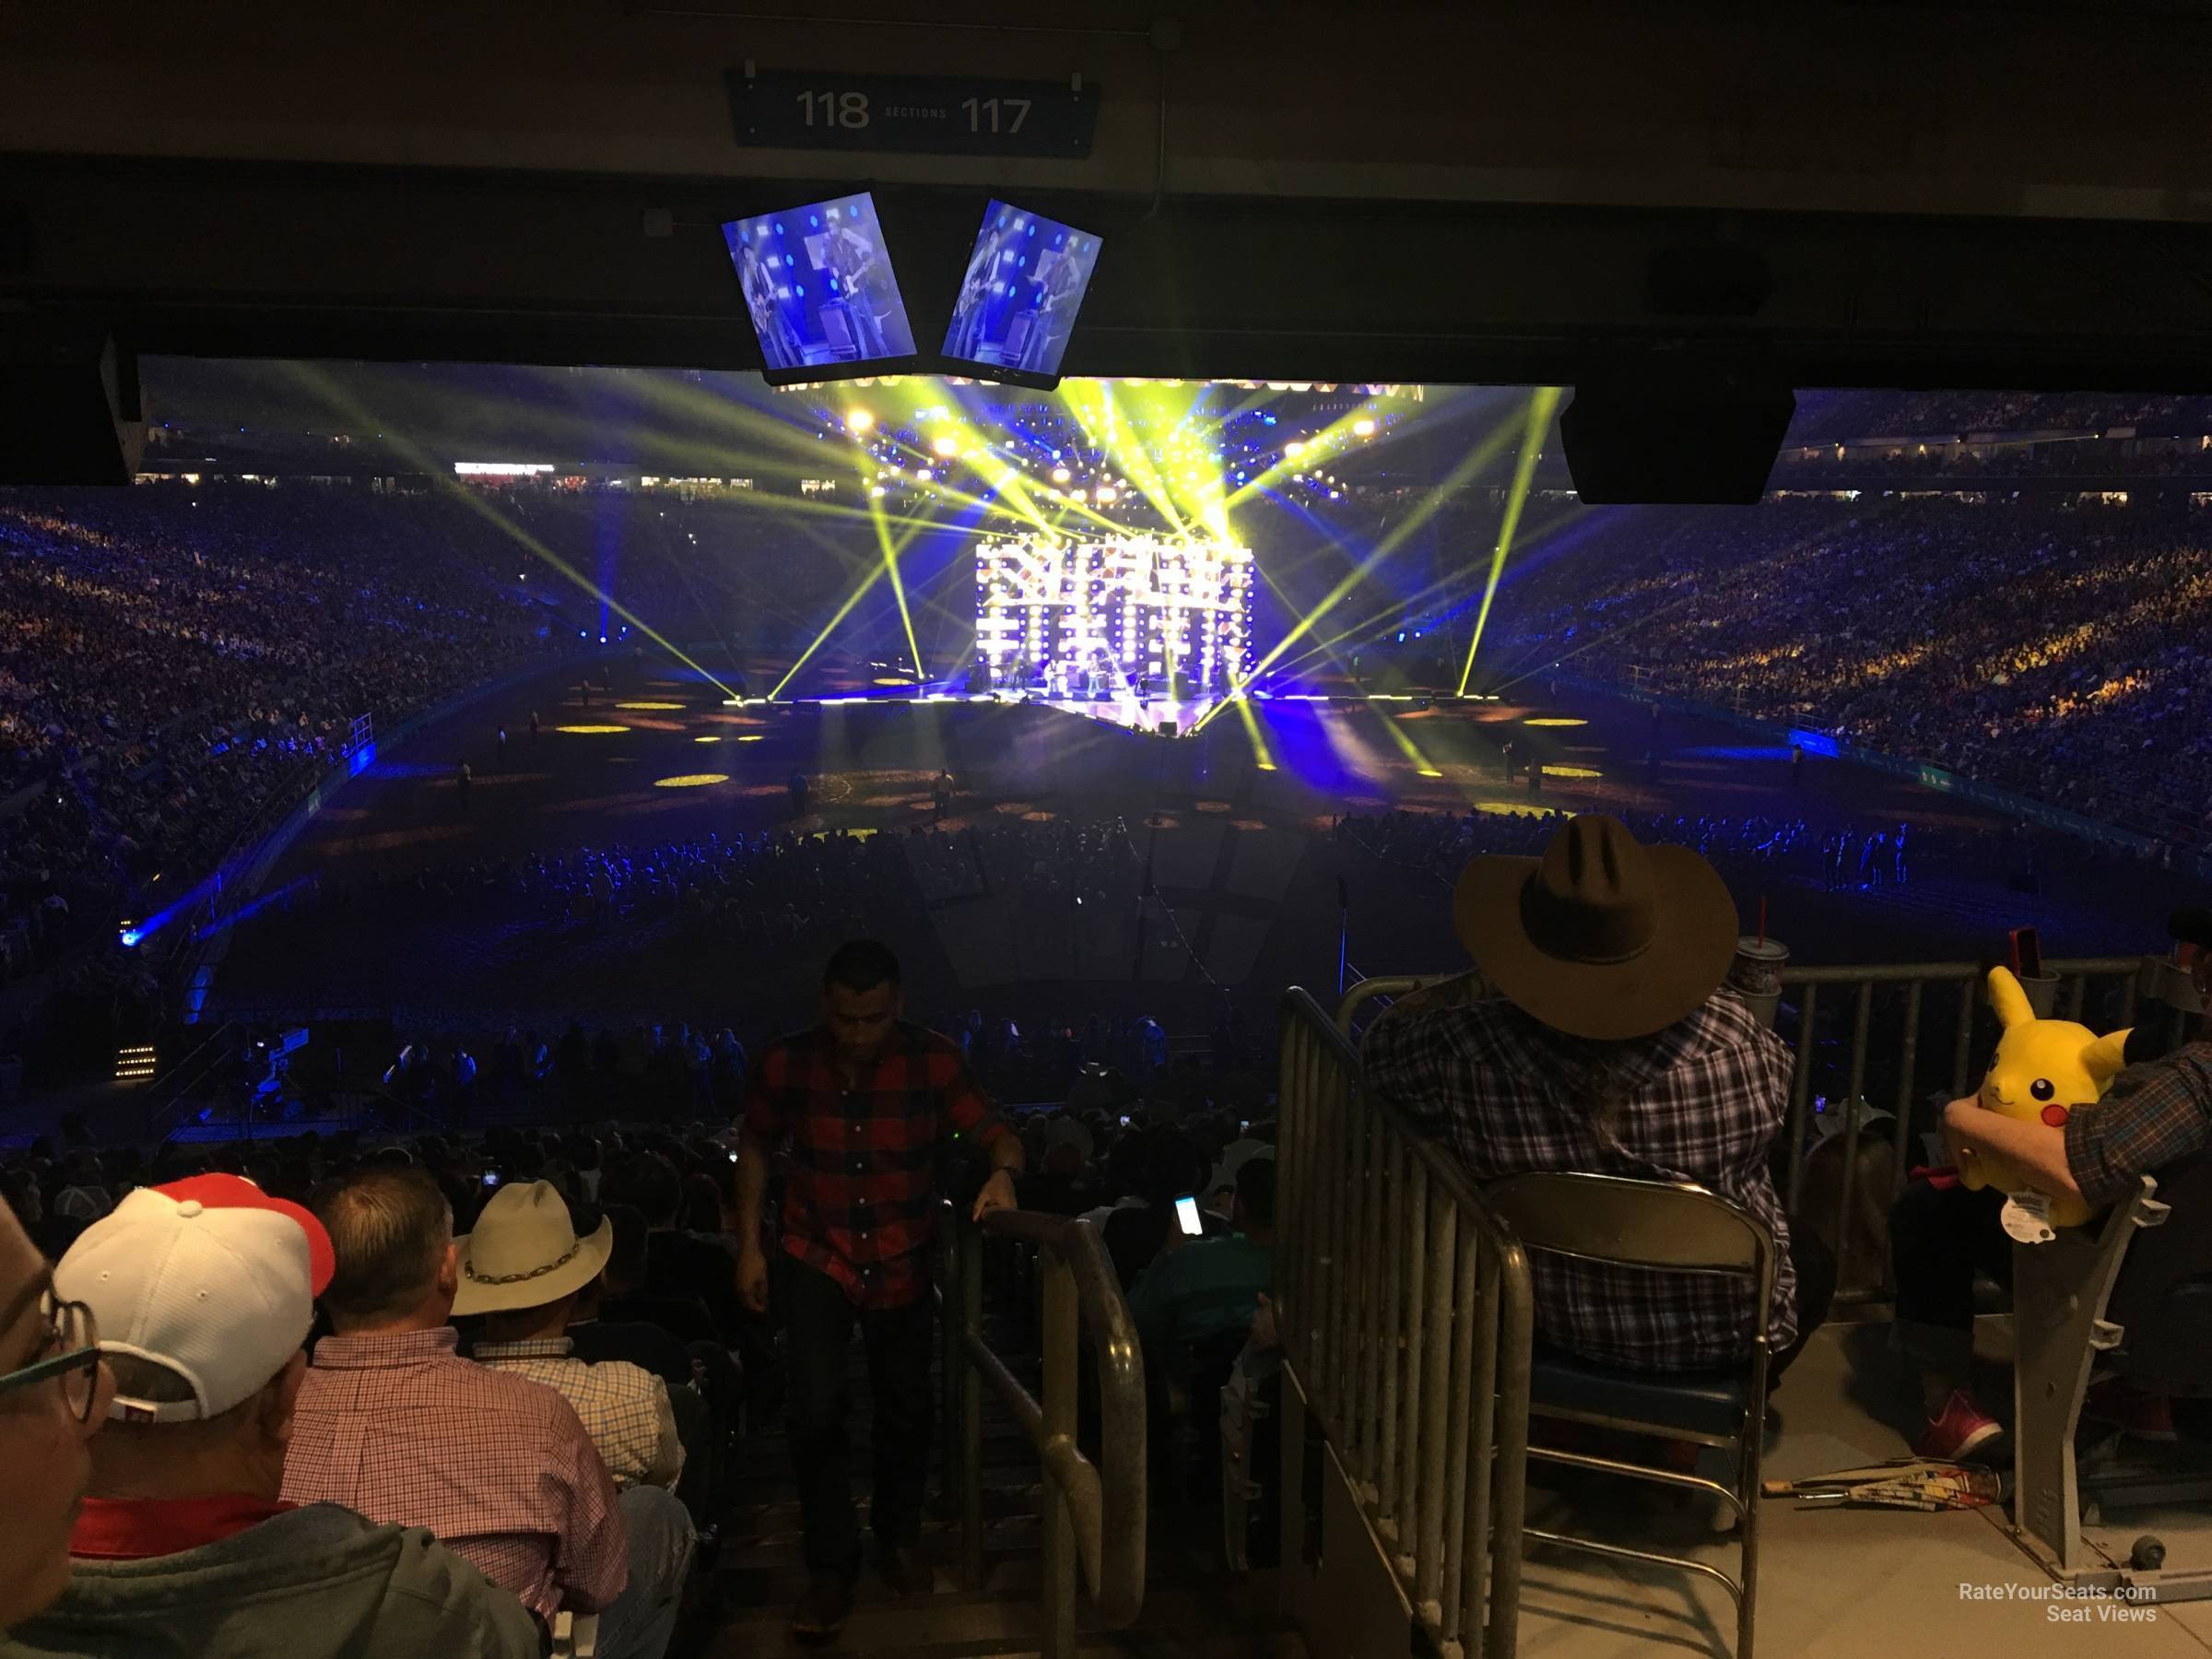 section 118, row hh seat view  for concert - nrg stadium